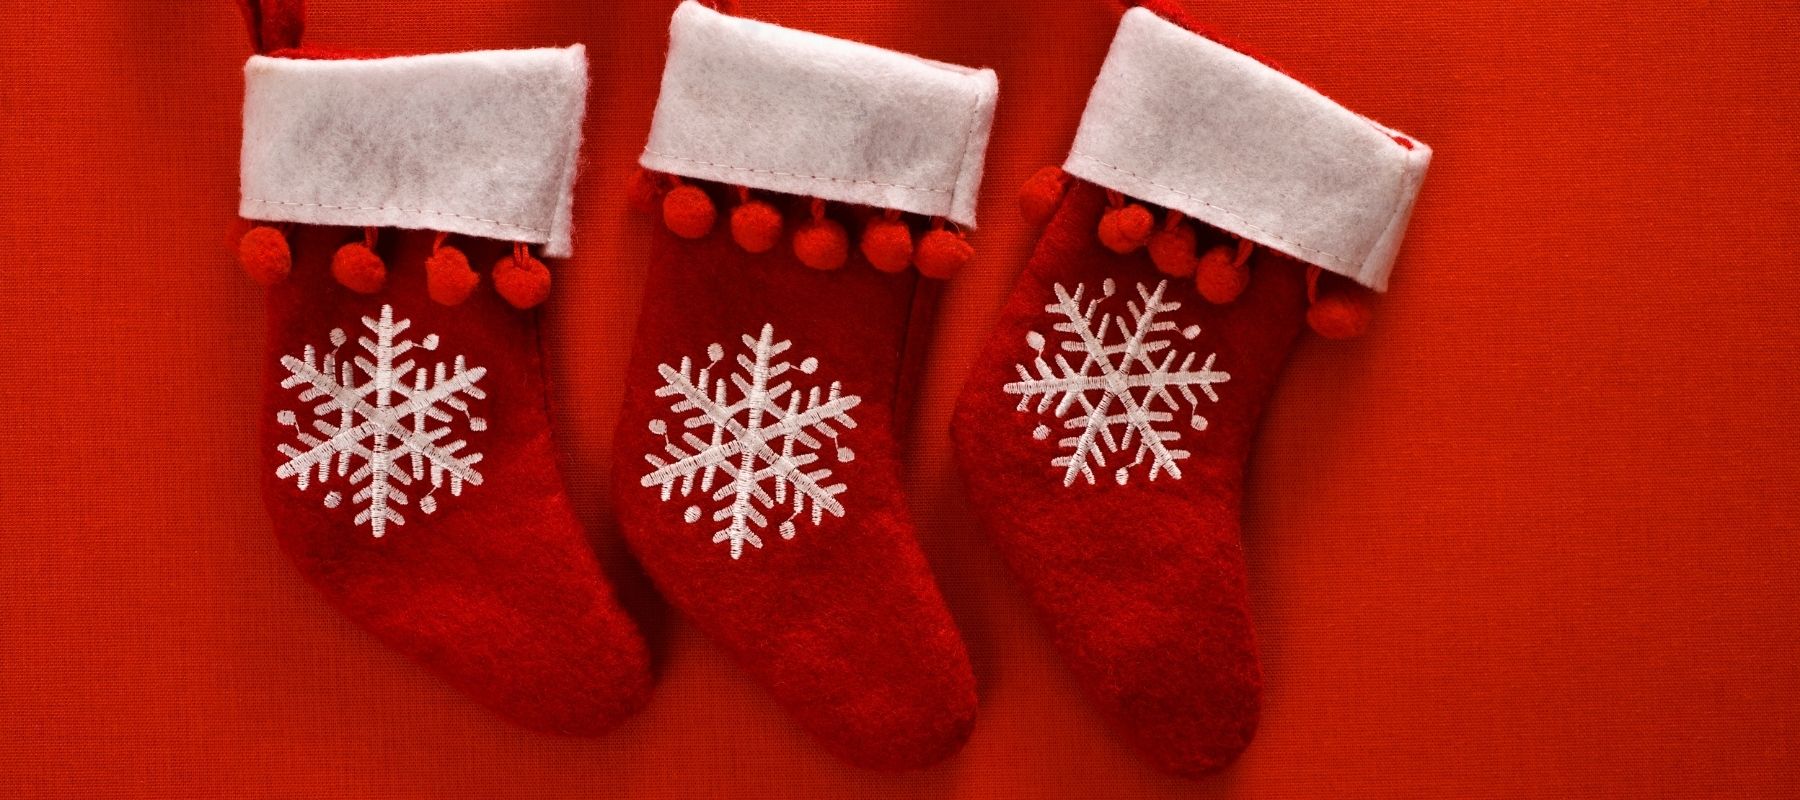 Festive red and white stockings pinned against a bright red background